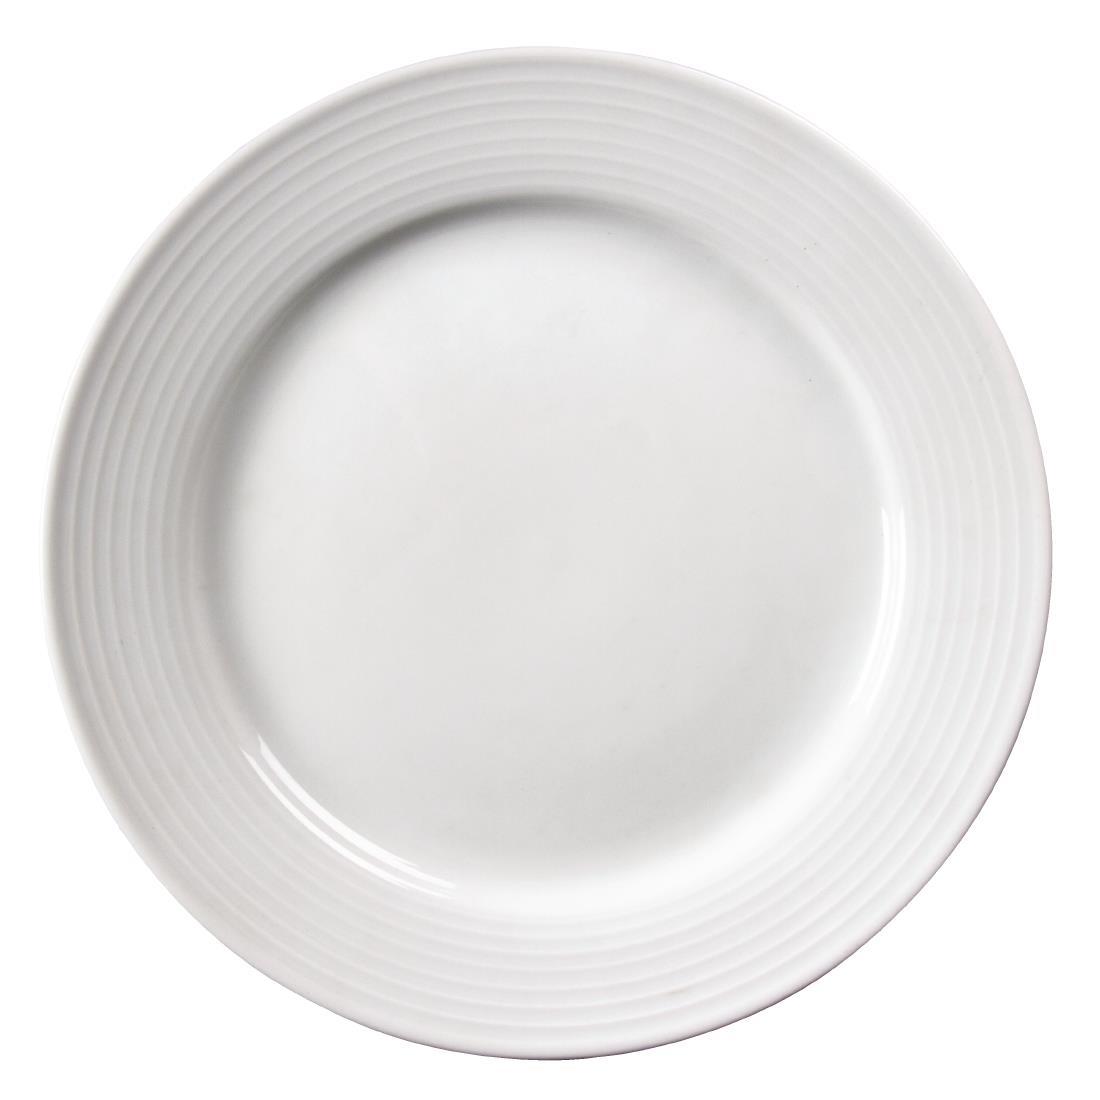 Olympia Linear Wide Rimmed Plates 250mm (Pack of 12) - U091  - 3